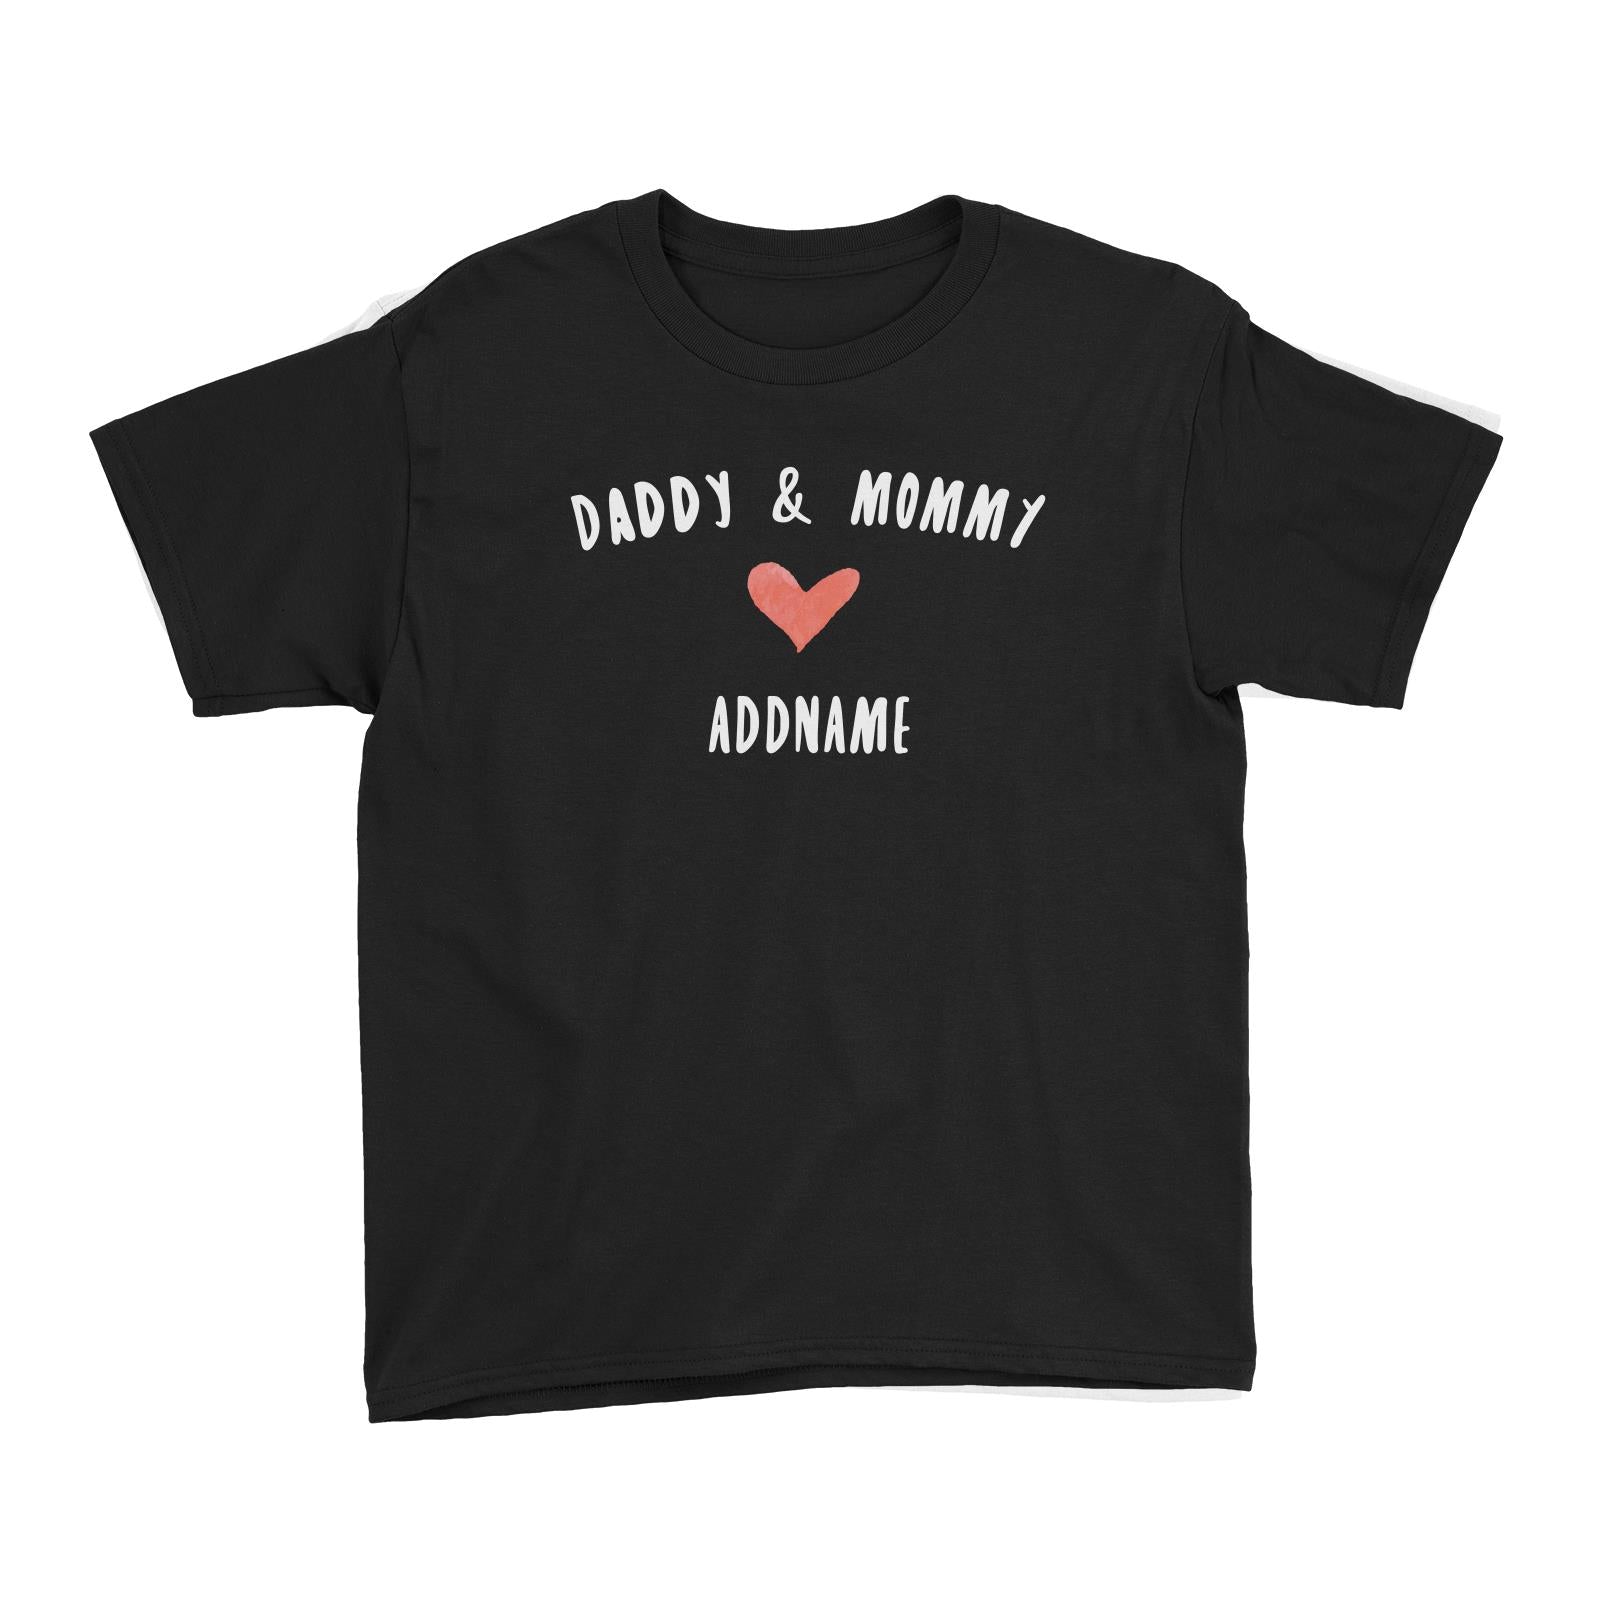 Daddy & Mommy Love Addname Kid's T-Shirt  Matching Family Personalizable Designs